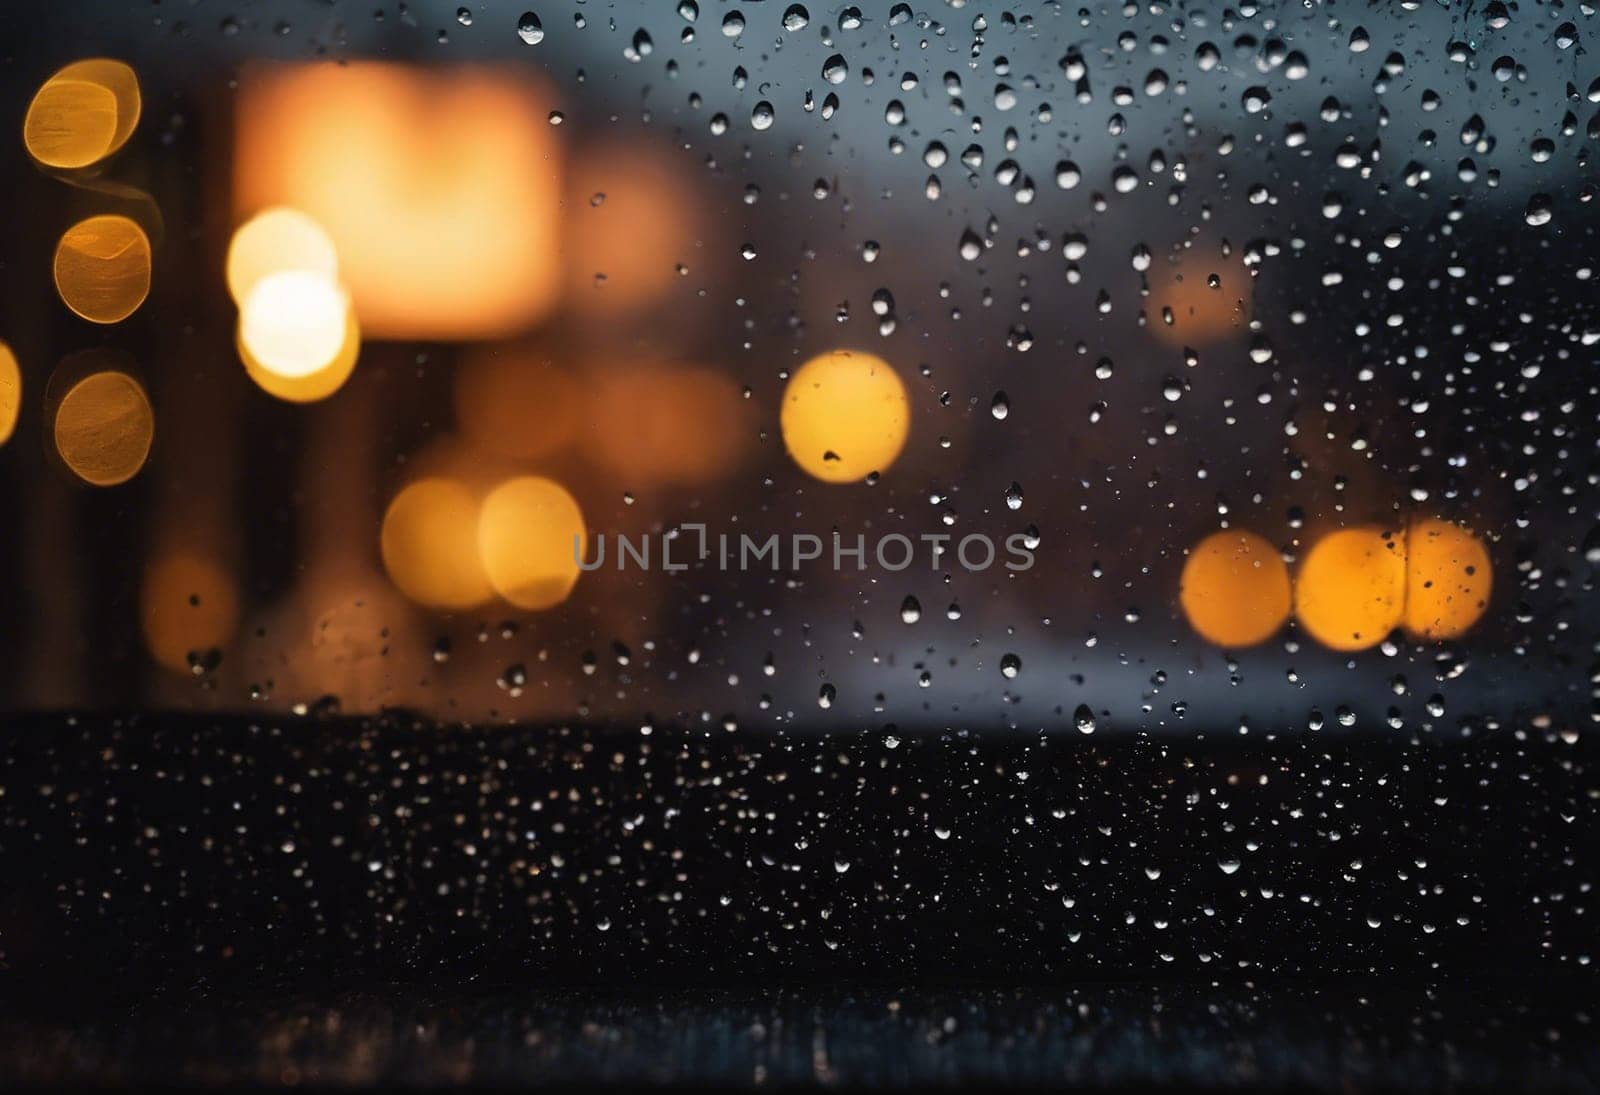 Raindrops on the window with bokeh lights. Abstract background.Raindrops on the window, bokeh lights in the background.